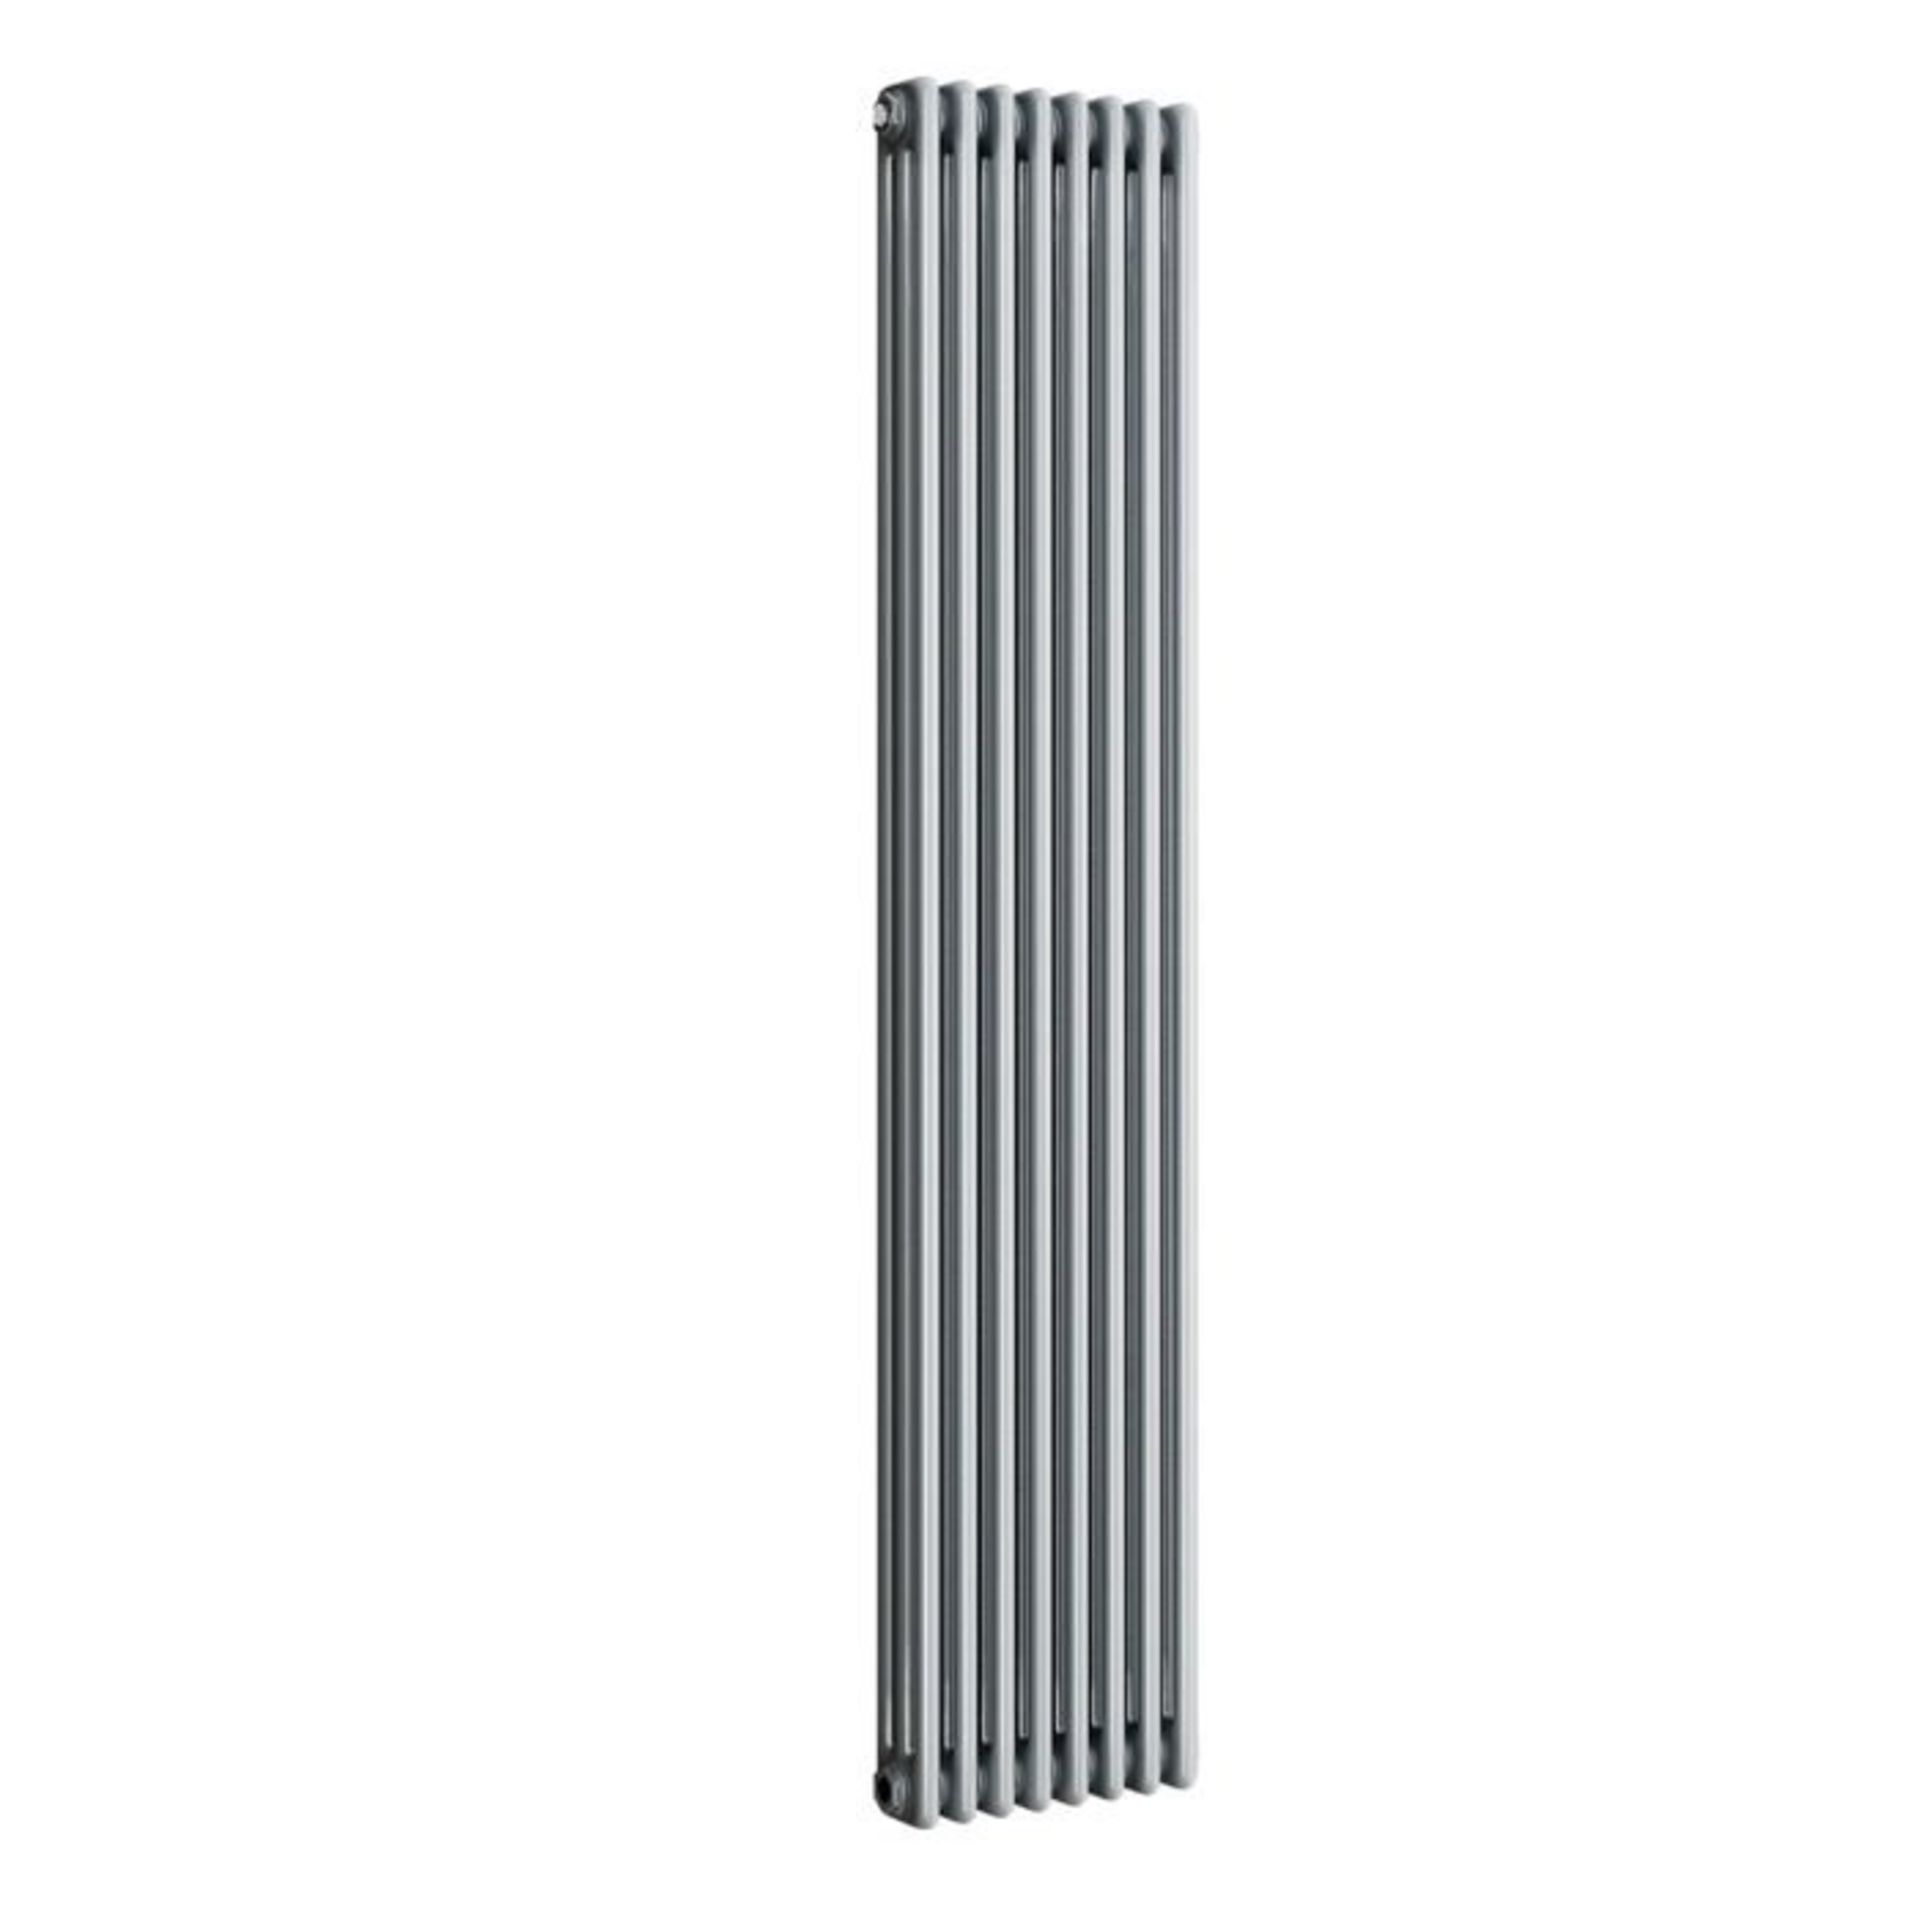 (M38) 1800x380mm Earl Grey Triple Panel Vertical Colosseum Radiator. RRP £479.99. Complies with - Image 3 of 3